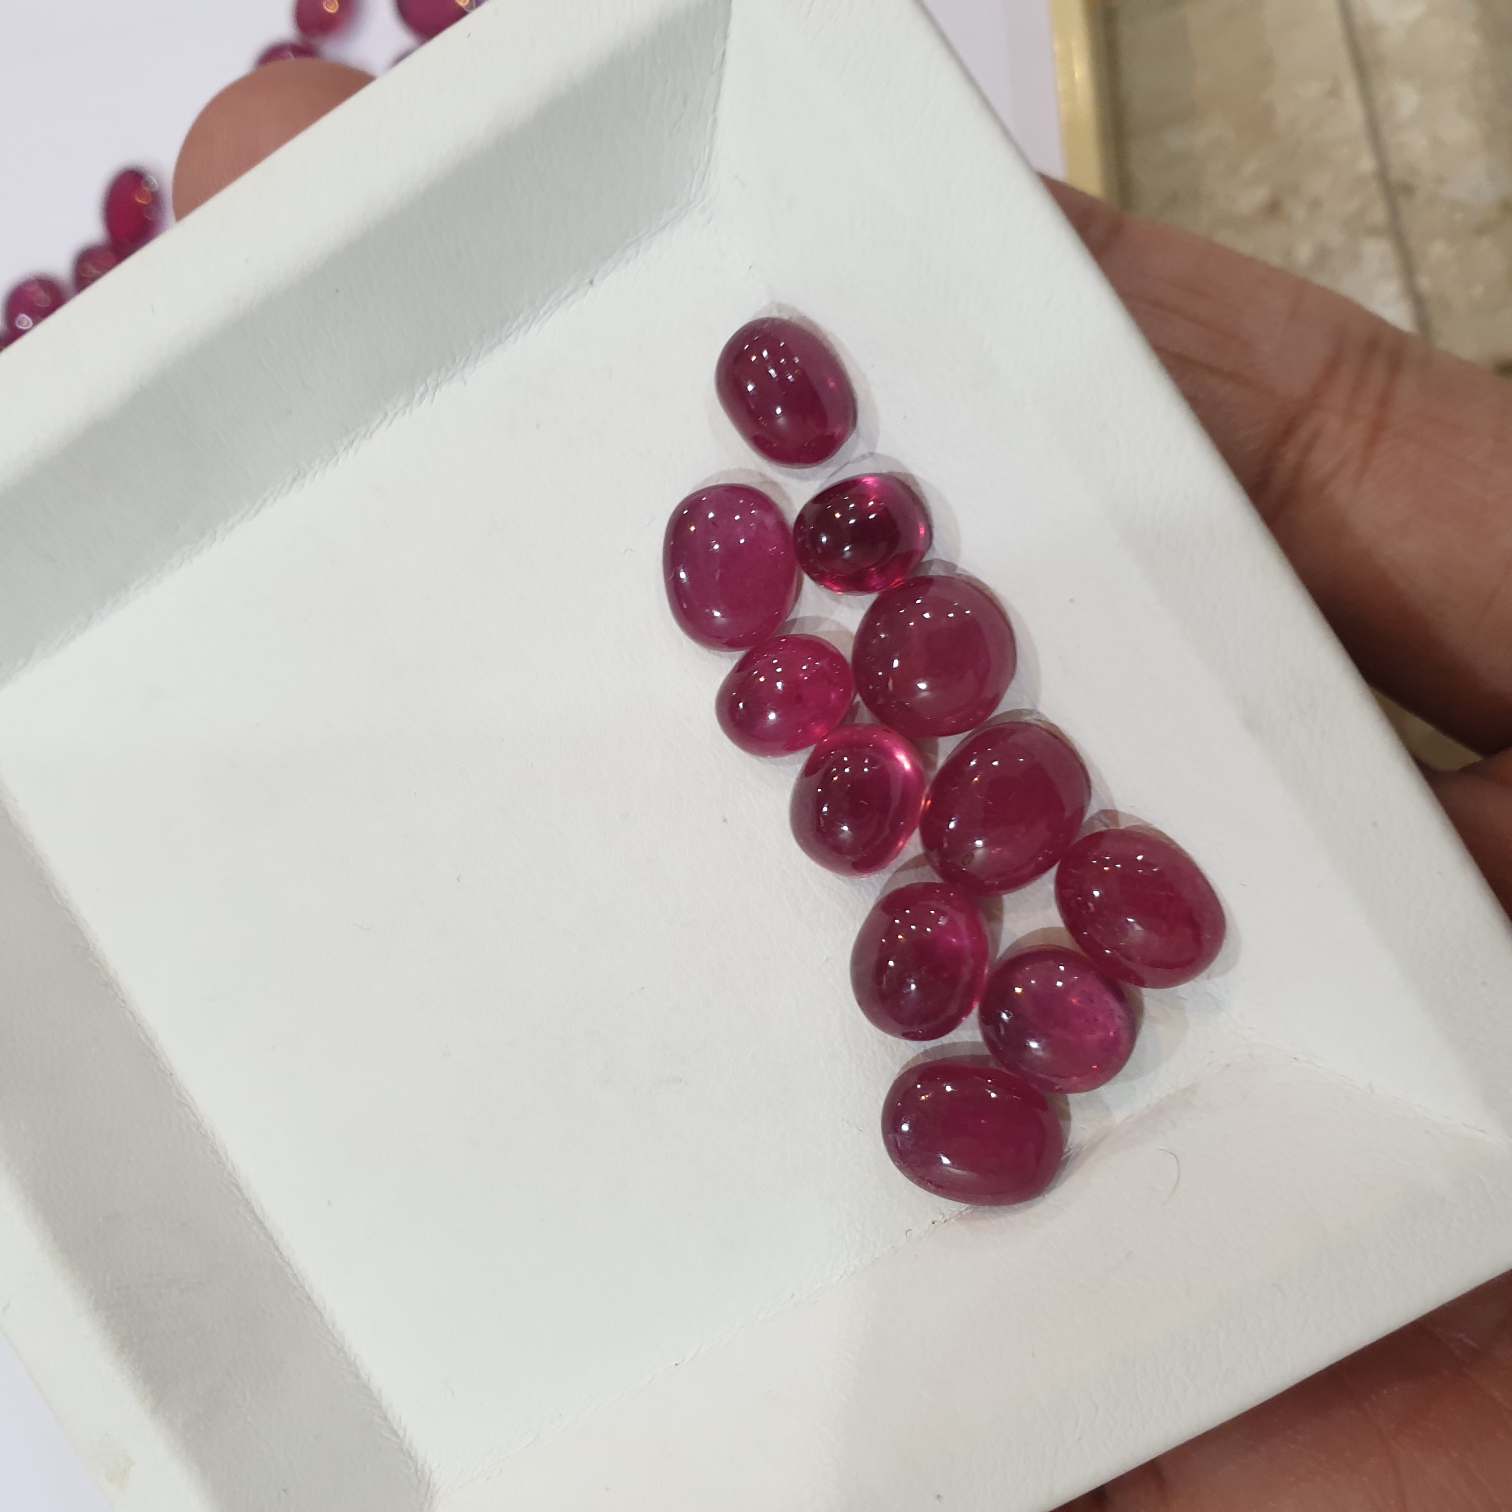 10 Pcs Natural Ruby Cabochons Big Sizes 8-11mm Ovals African Mined - The LabradoriteKing